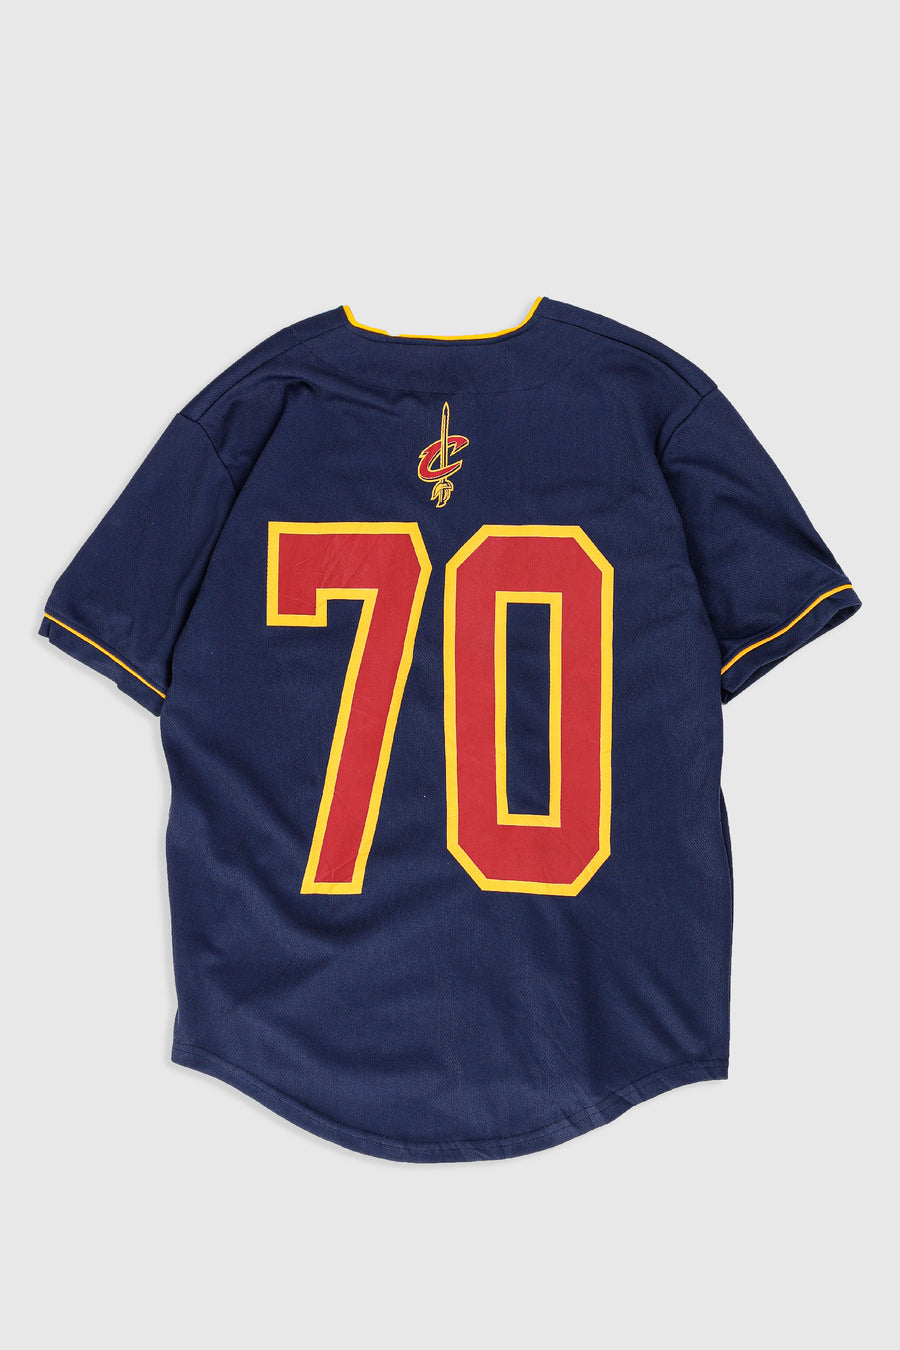 Vintage Cavaliers Basketball Jersey - S